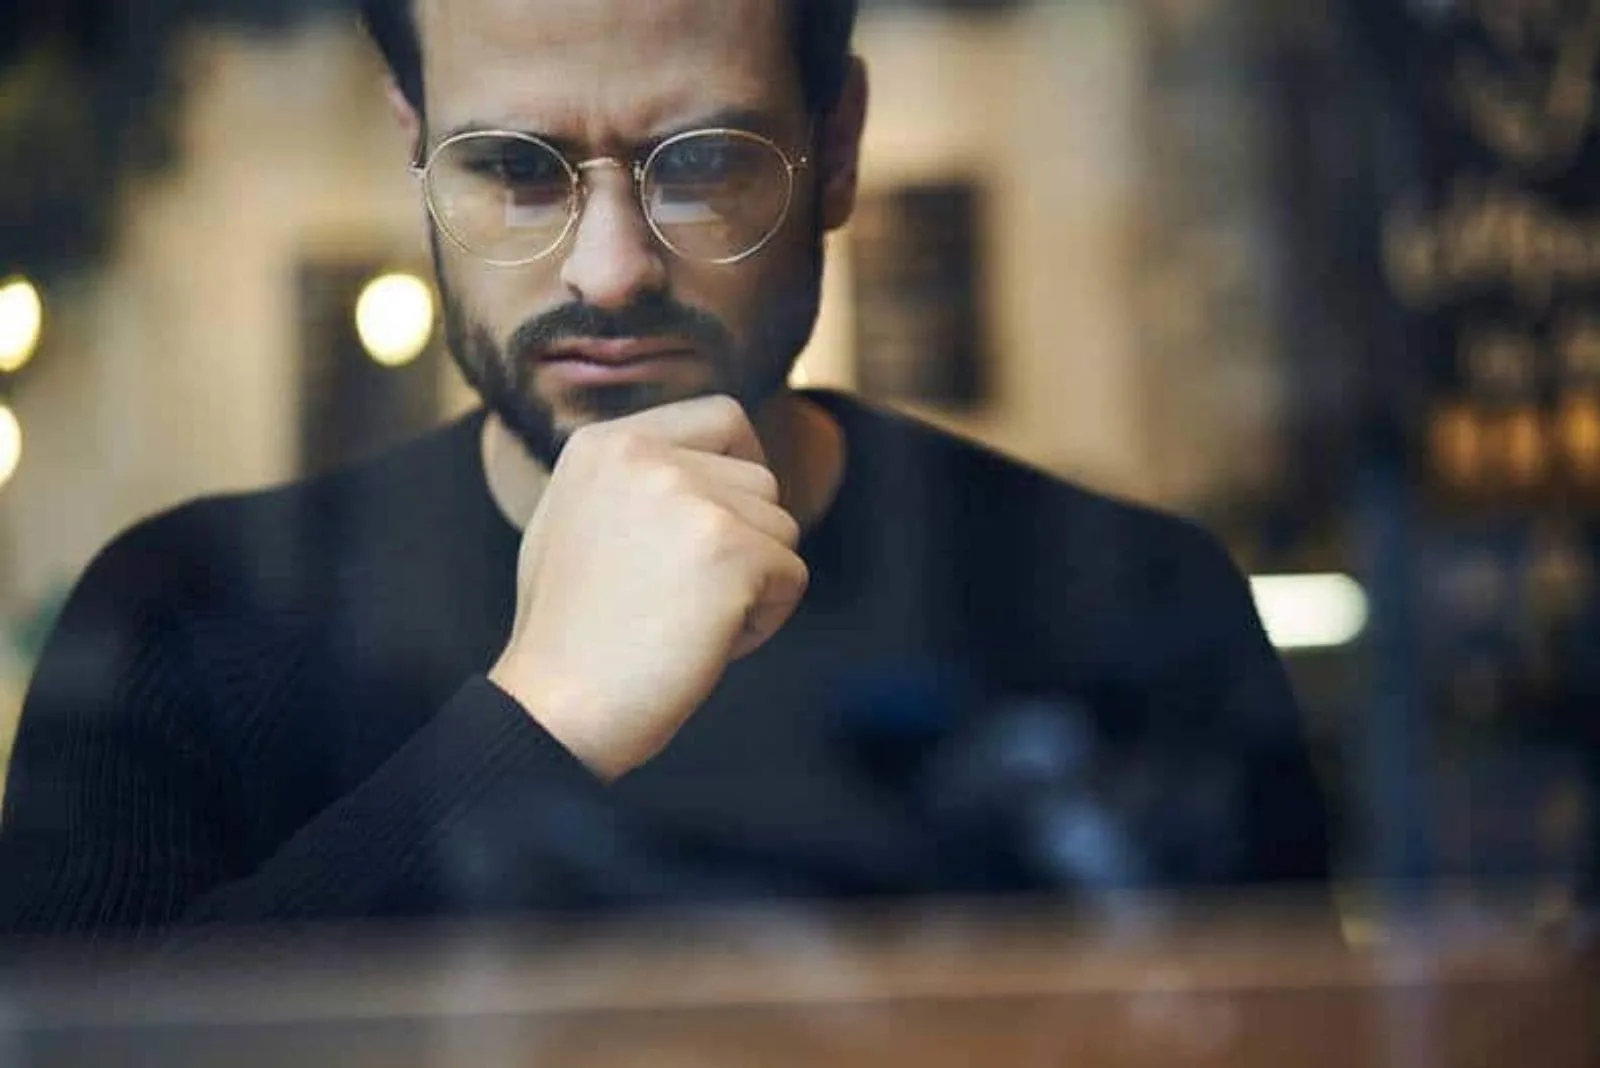 bearded man with glasses looking worried